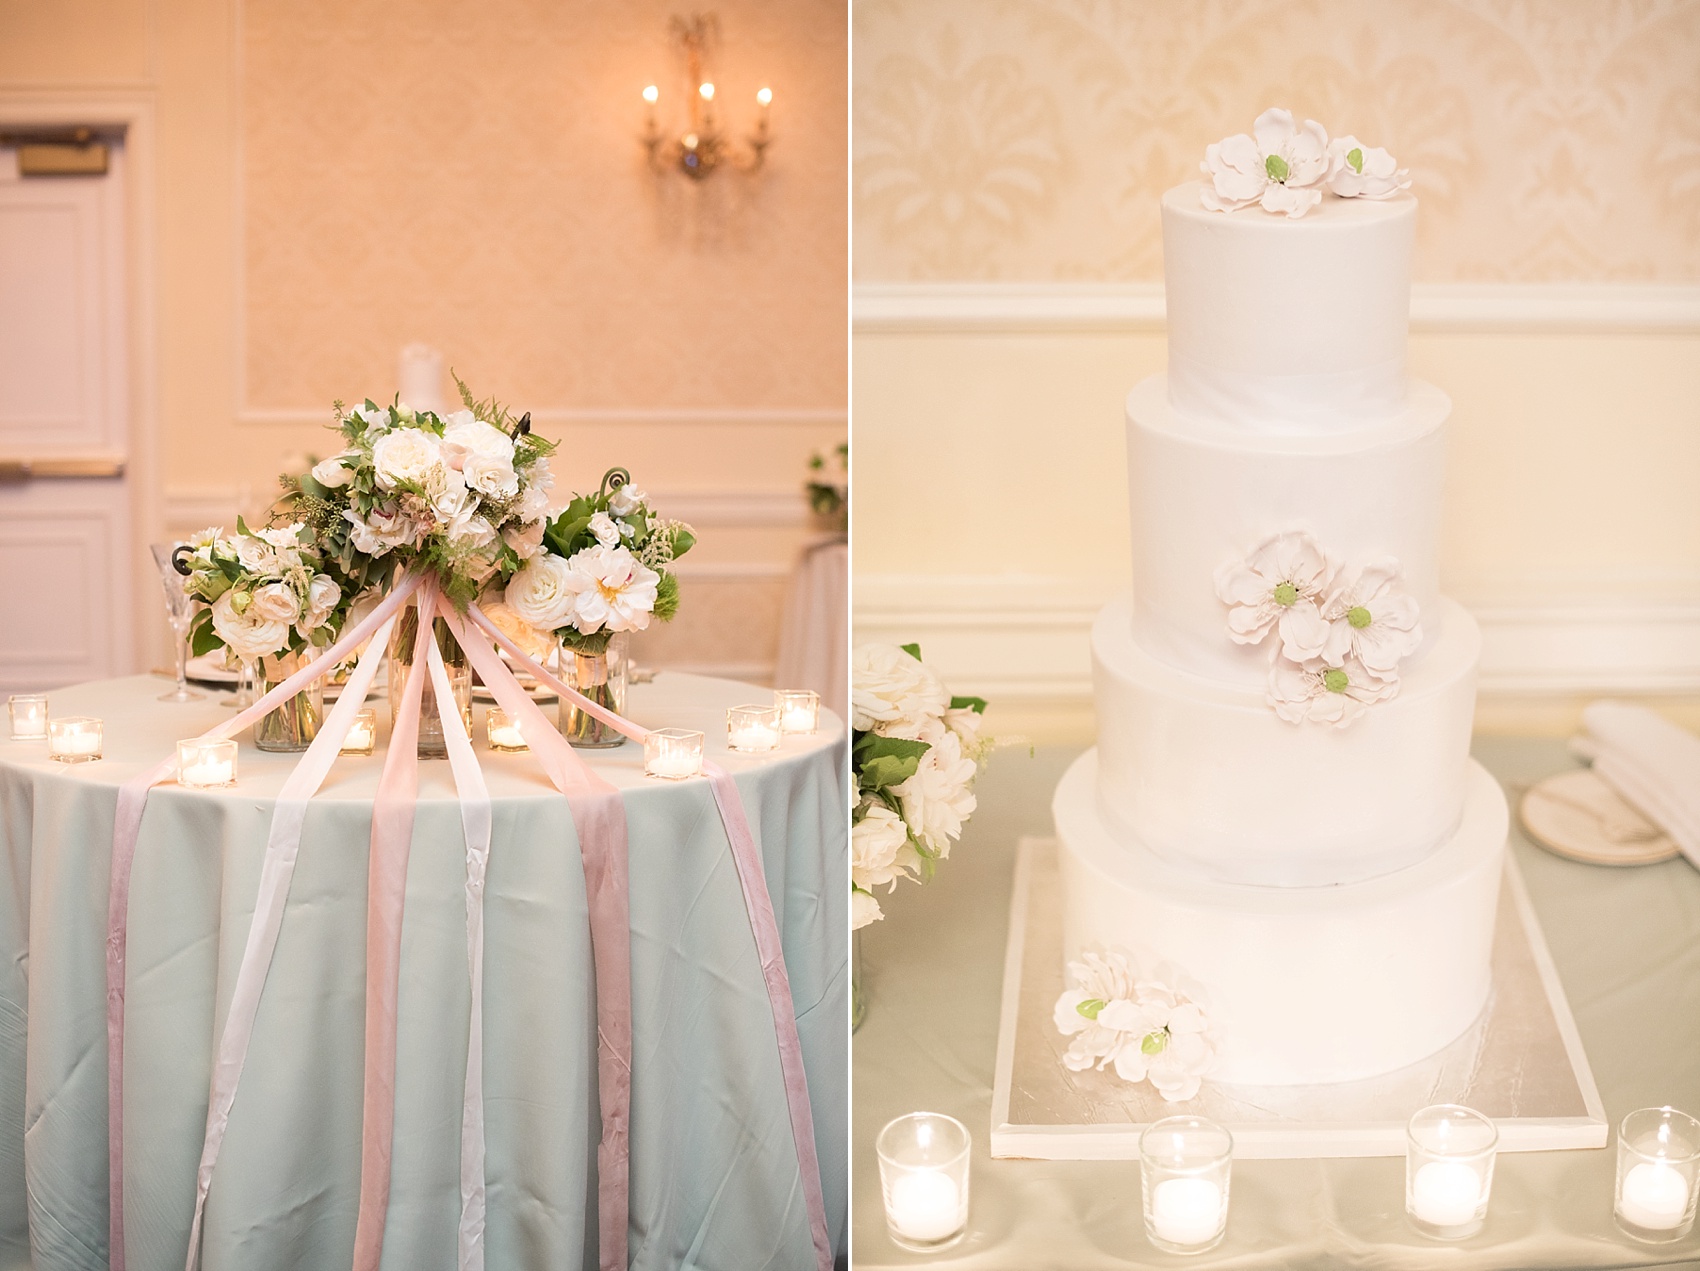 Pearl River Hilton wedding party photos of white tiered cake with dogwood sugar flowers. Images by Mikkel Paige Photography, NYC wedding photographer.